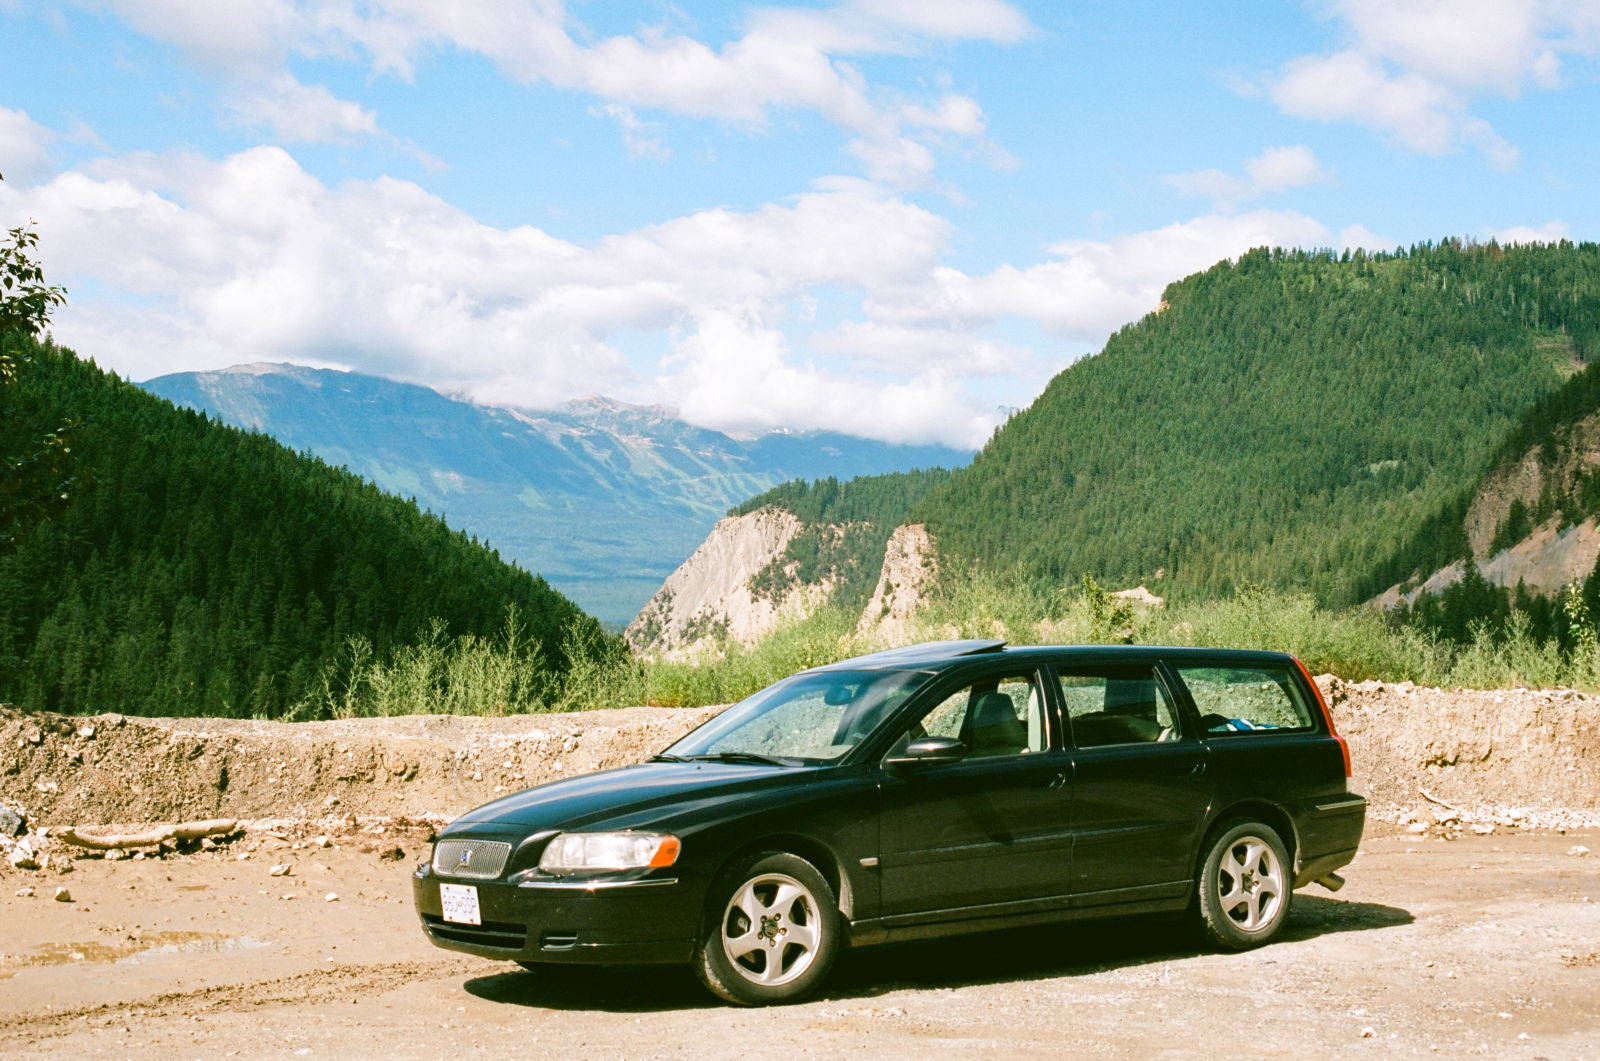 Illustration for article titled Wagons from 2006: Subaru Legacy 2.5i vs. Volvo V70 2.5T AWD